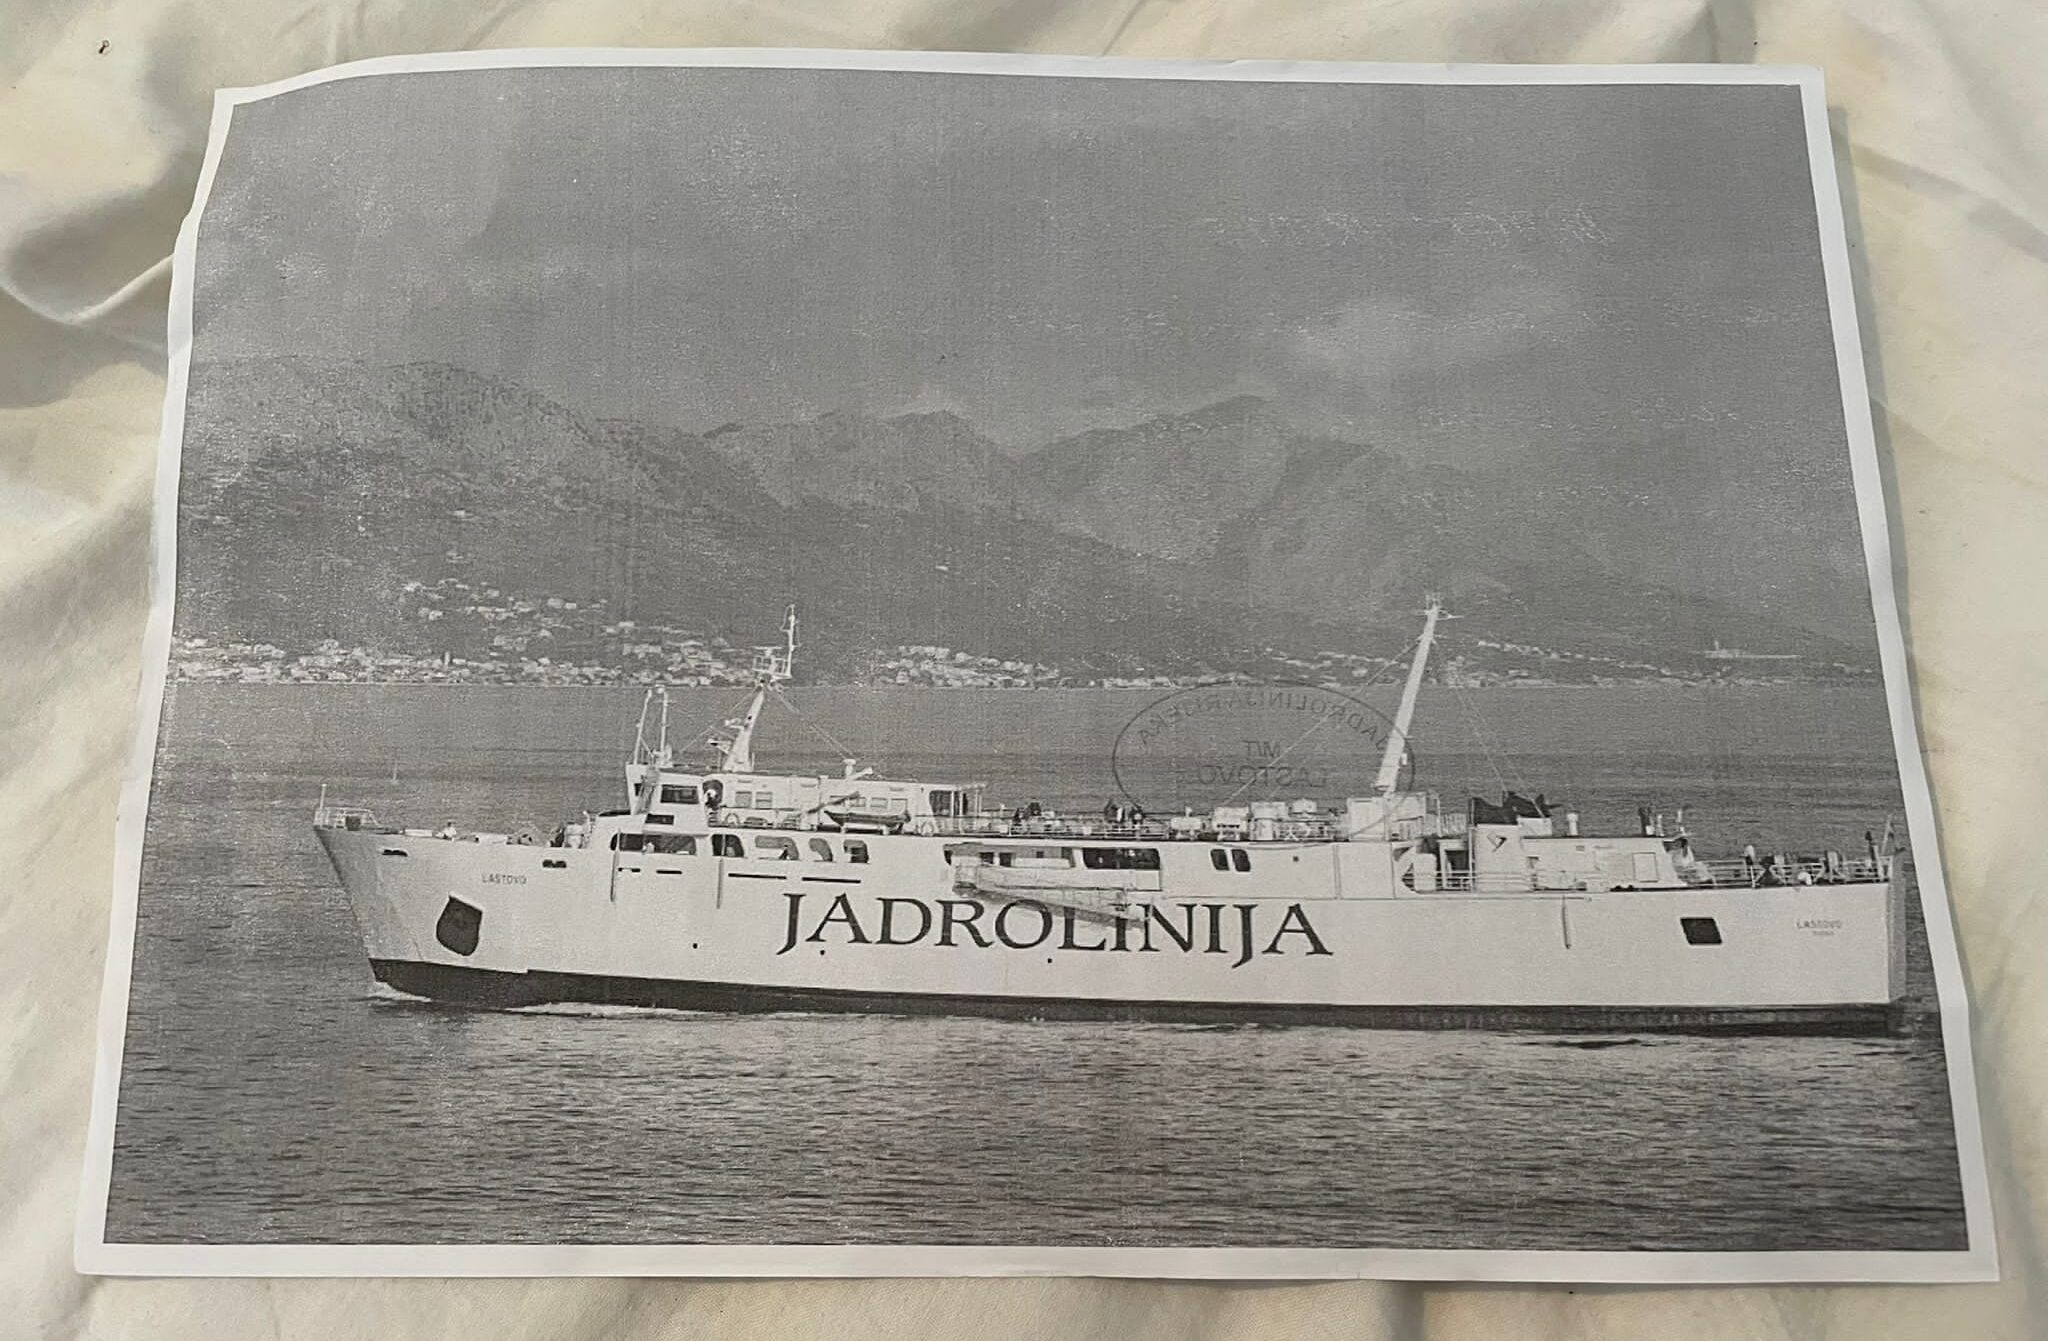 Boy greets Jadrolinija ferry everyday for two months and gets beautiful surprise from captain